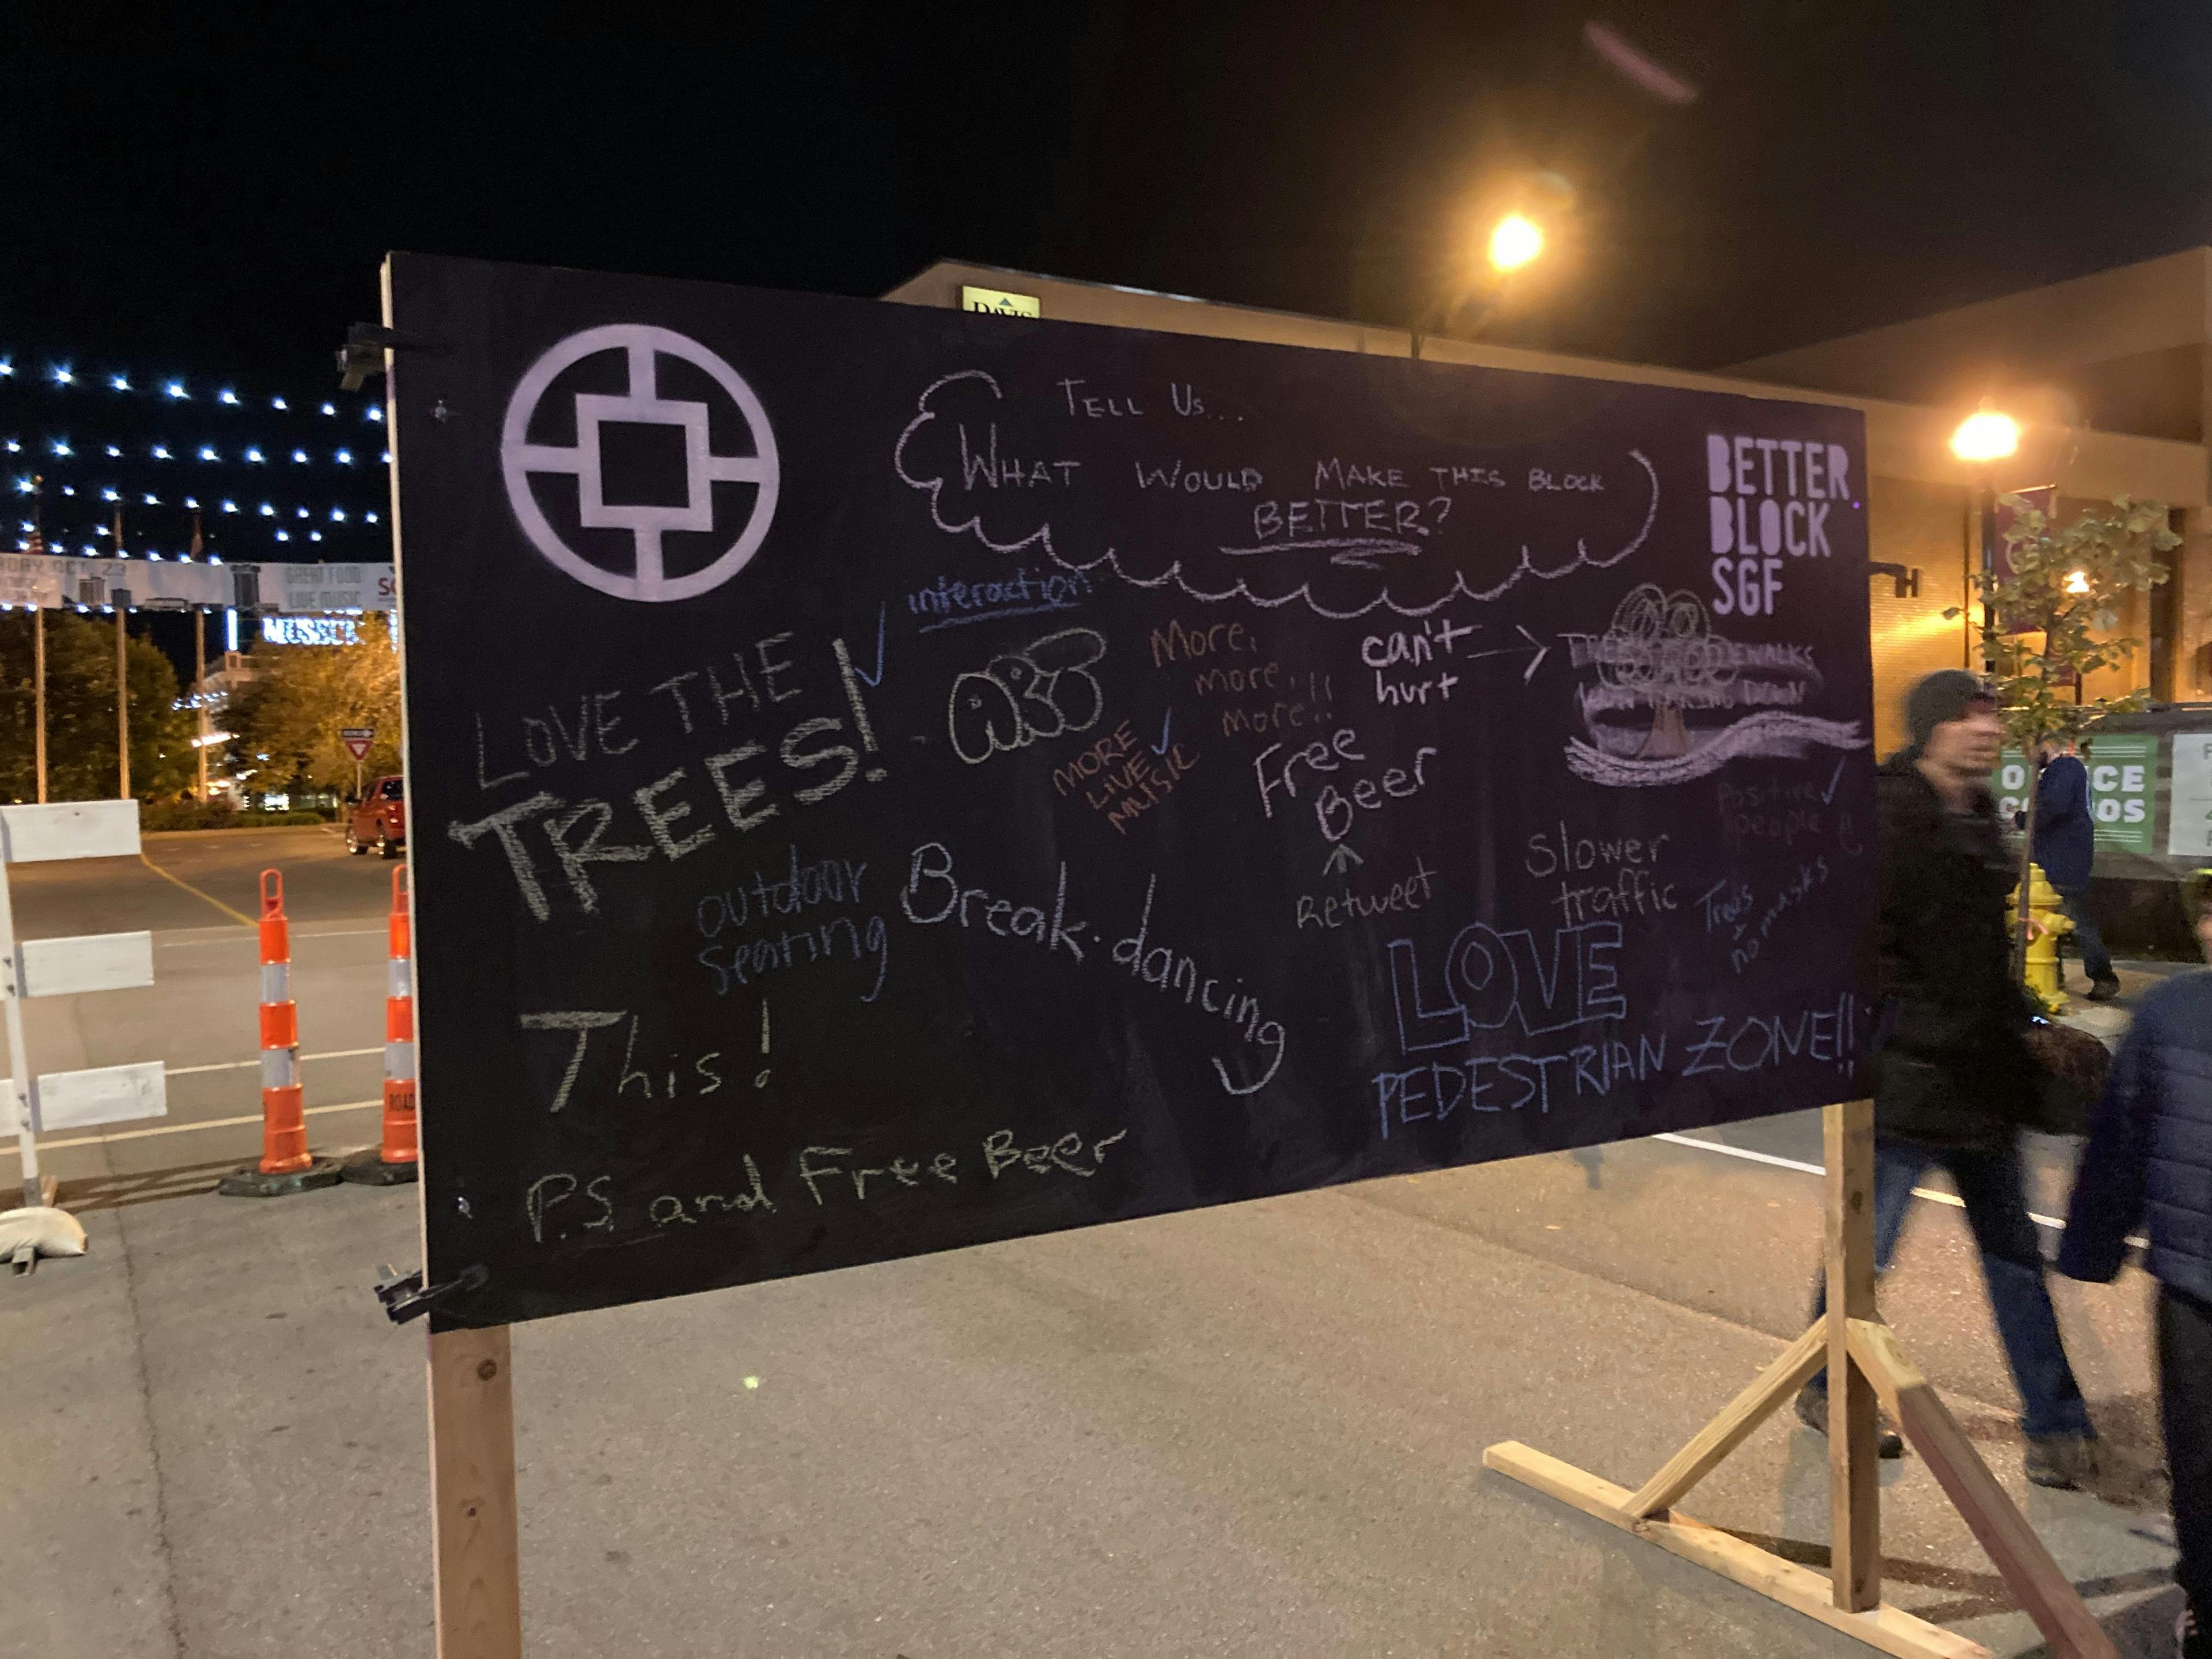 Image of a chalk board with "Love the trees!" messaging on South Avenue.